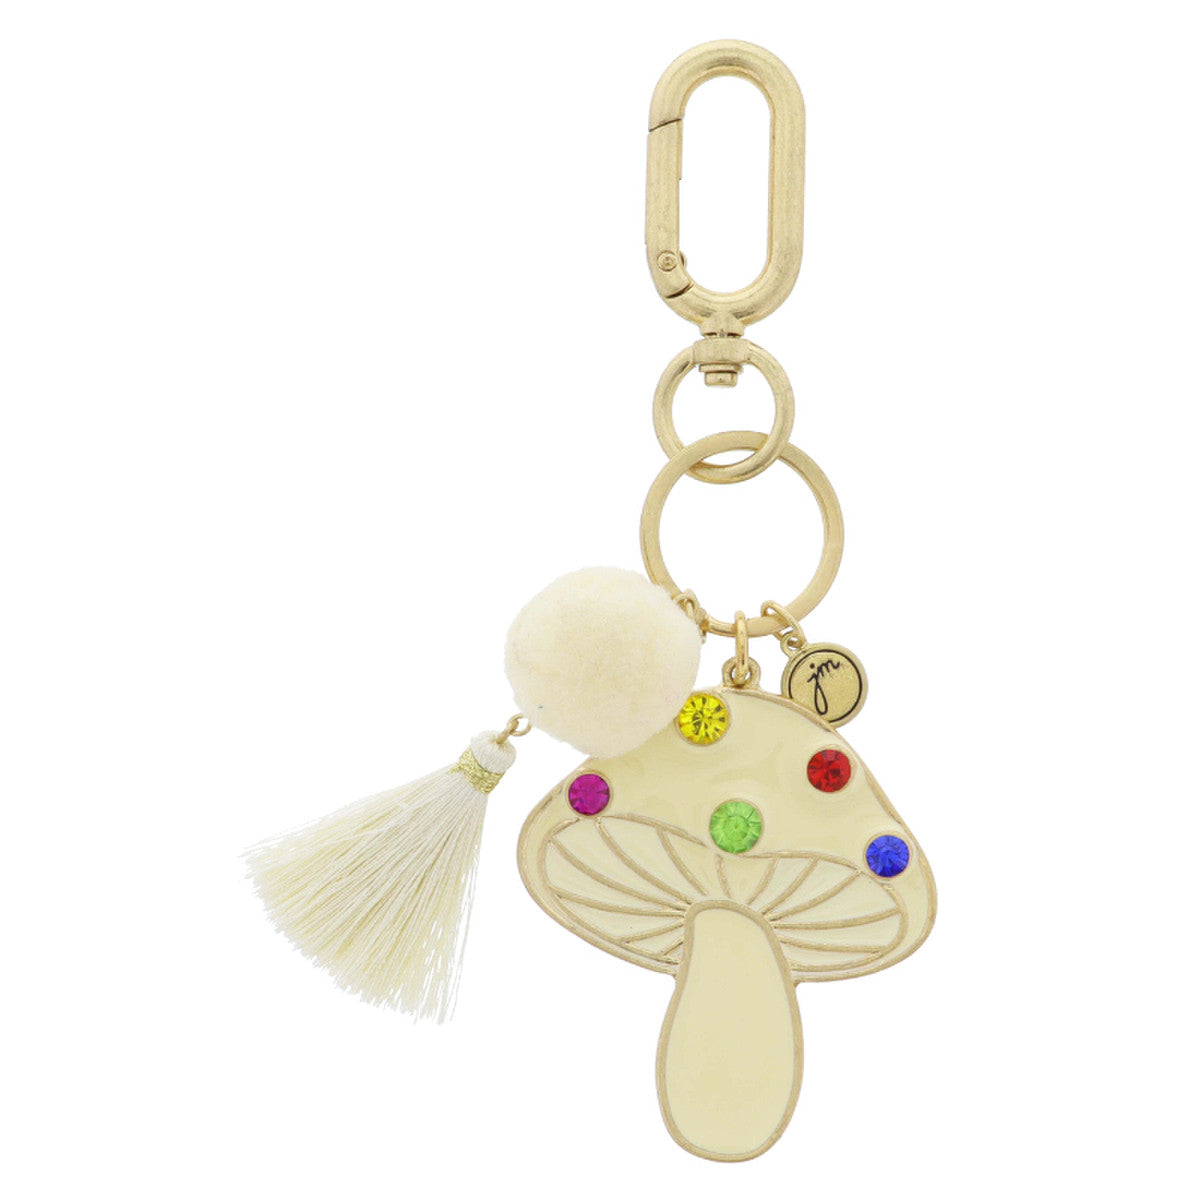 IVORY MUSHROOM WITH CRYSTAL ACCENTS KEYCHAIN